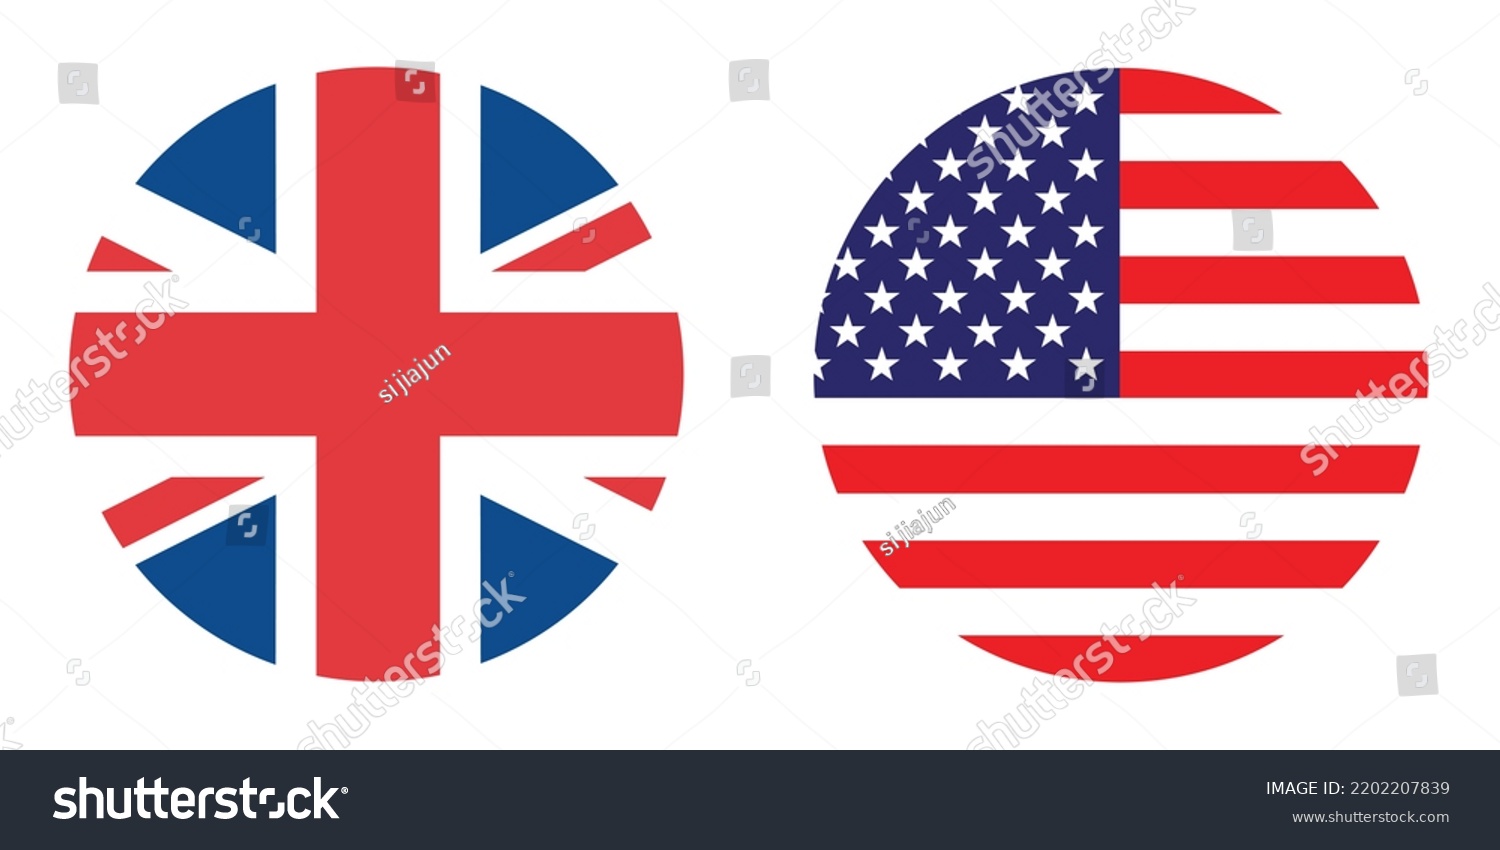 SVG of British and American flags. UK. U.S.A. Standard colors. Circular icon. Round flag. Digital illustration. Computer illustration. Vector illustration. svg